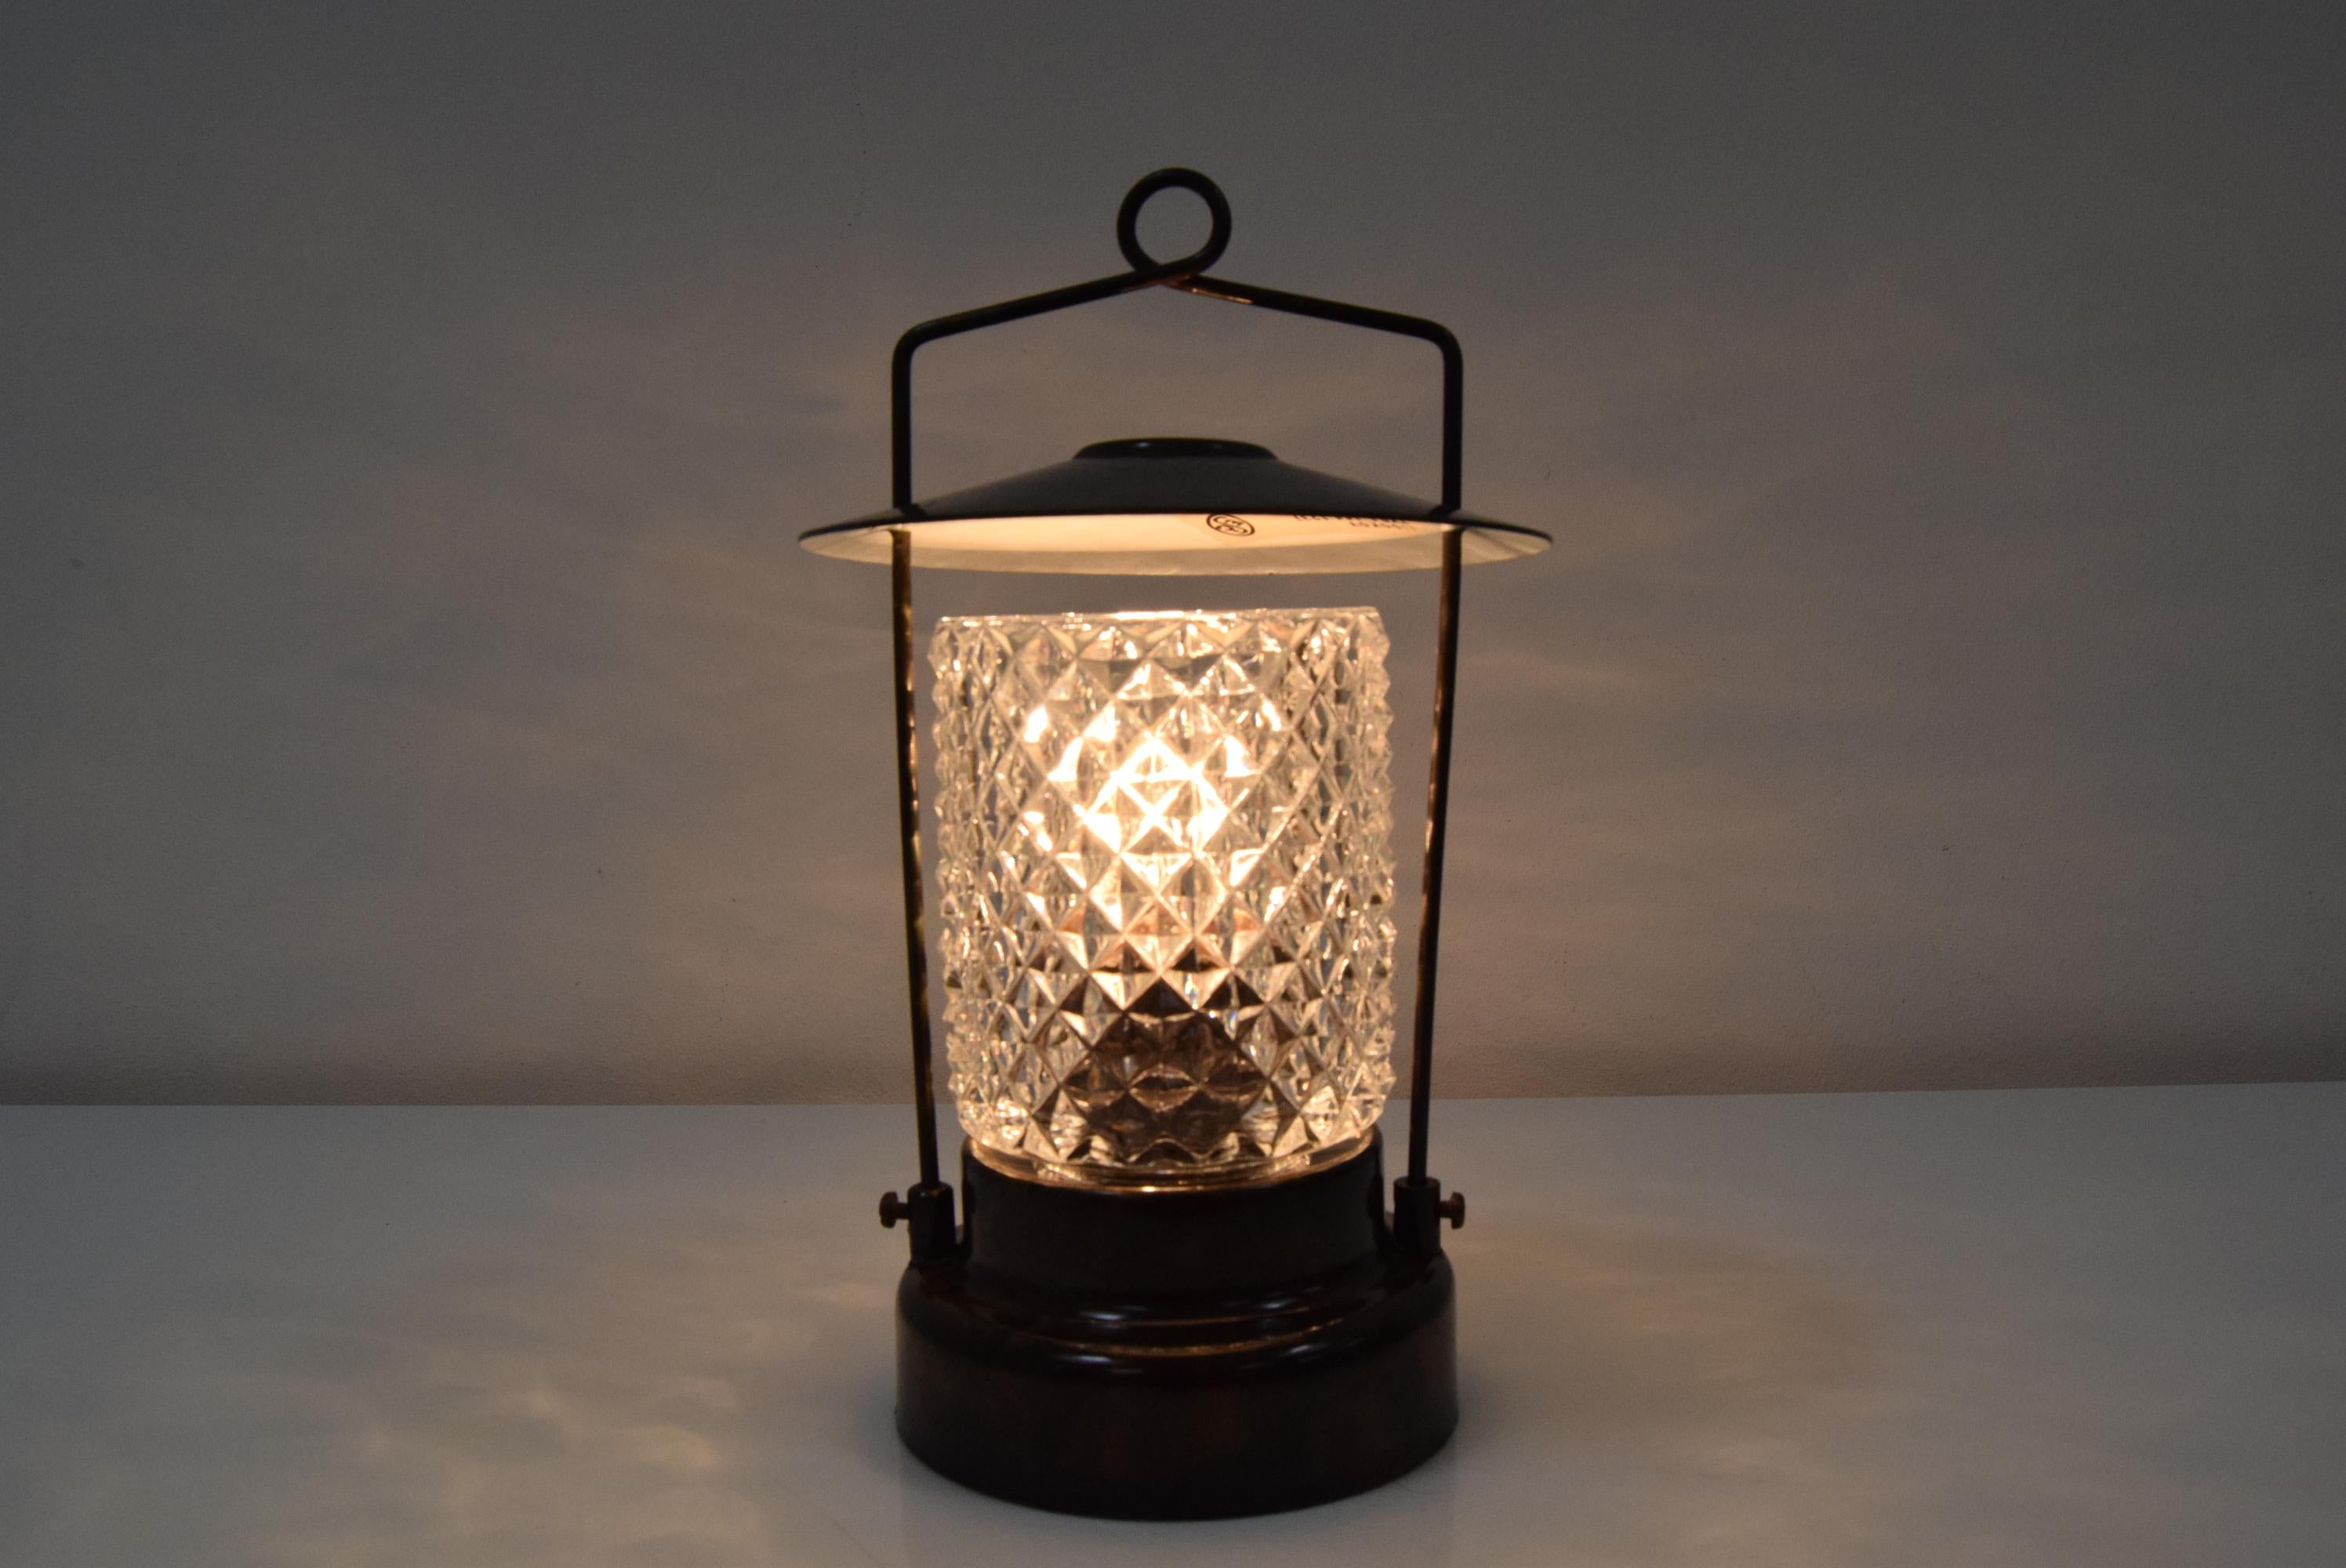 Made in Czechoslovakia
Made of Glass and Metal
With Aged Patina
1x40W, E27 or E26 Bulb
New Cabling
Re-Polished
Good Original Condition
US Adapter Included